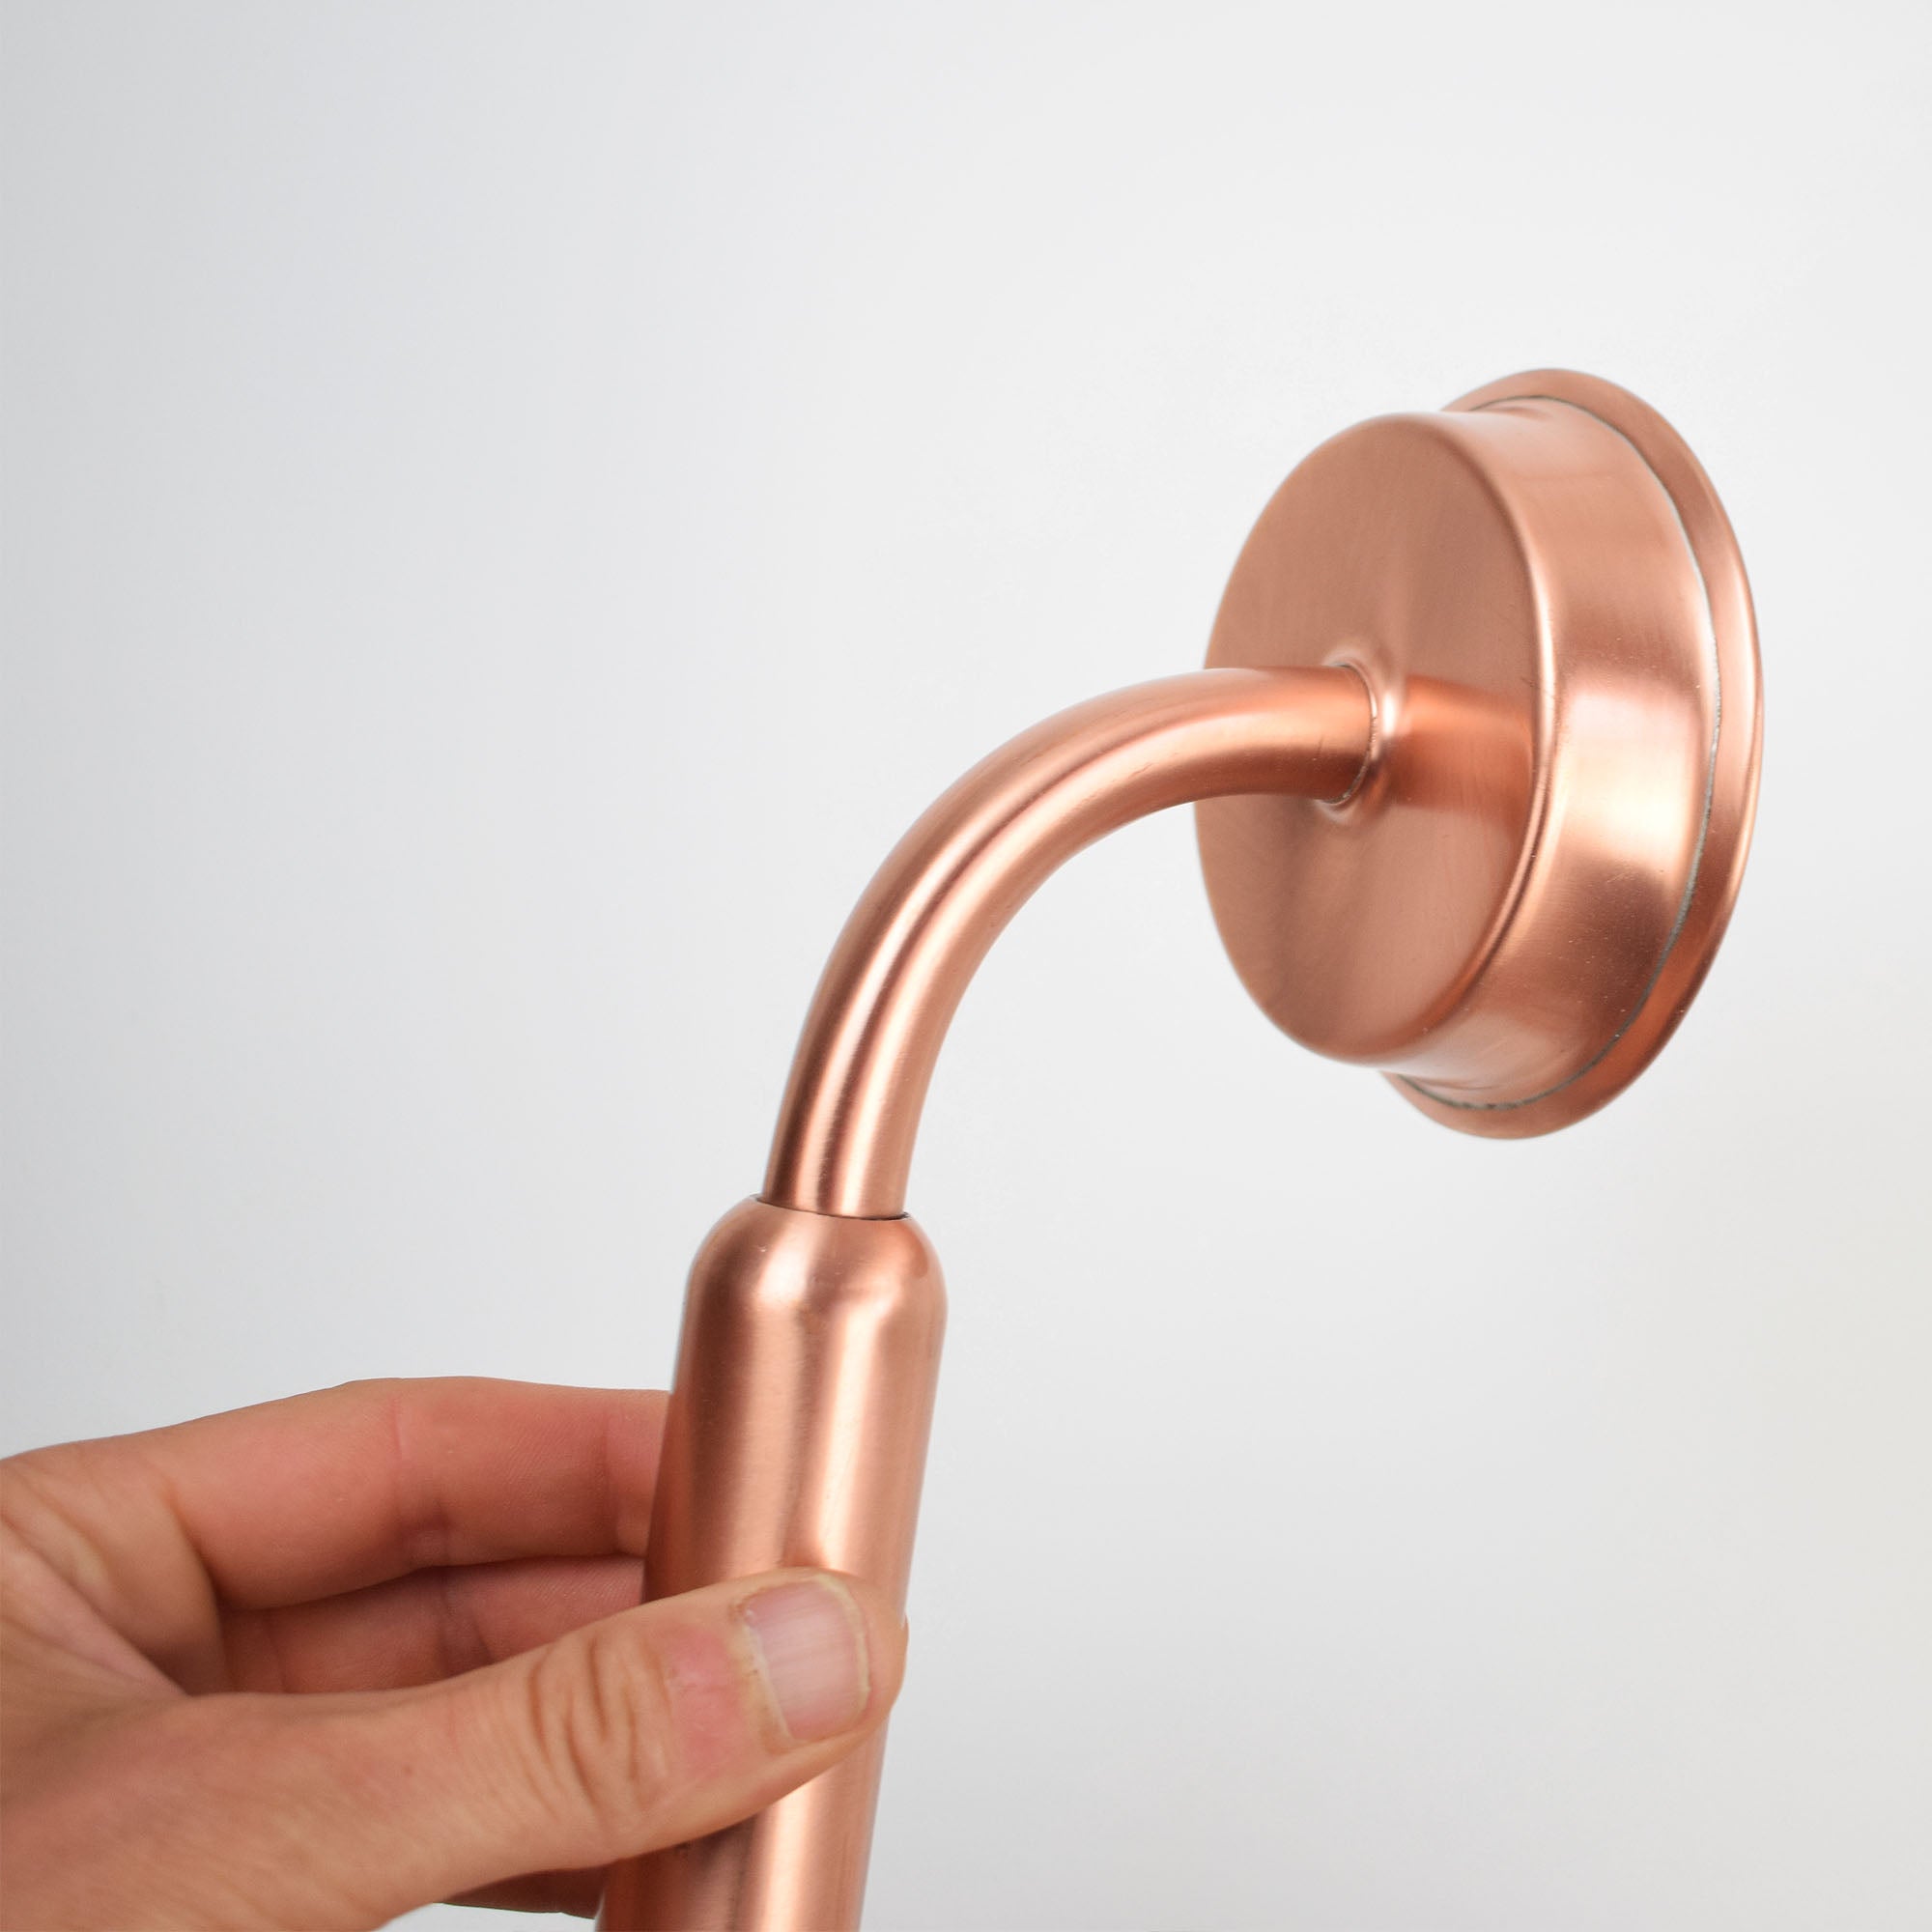 Genuine copper hand-shower made in England